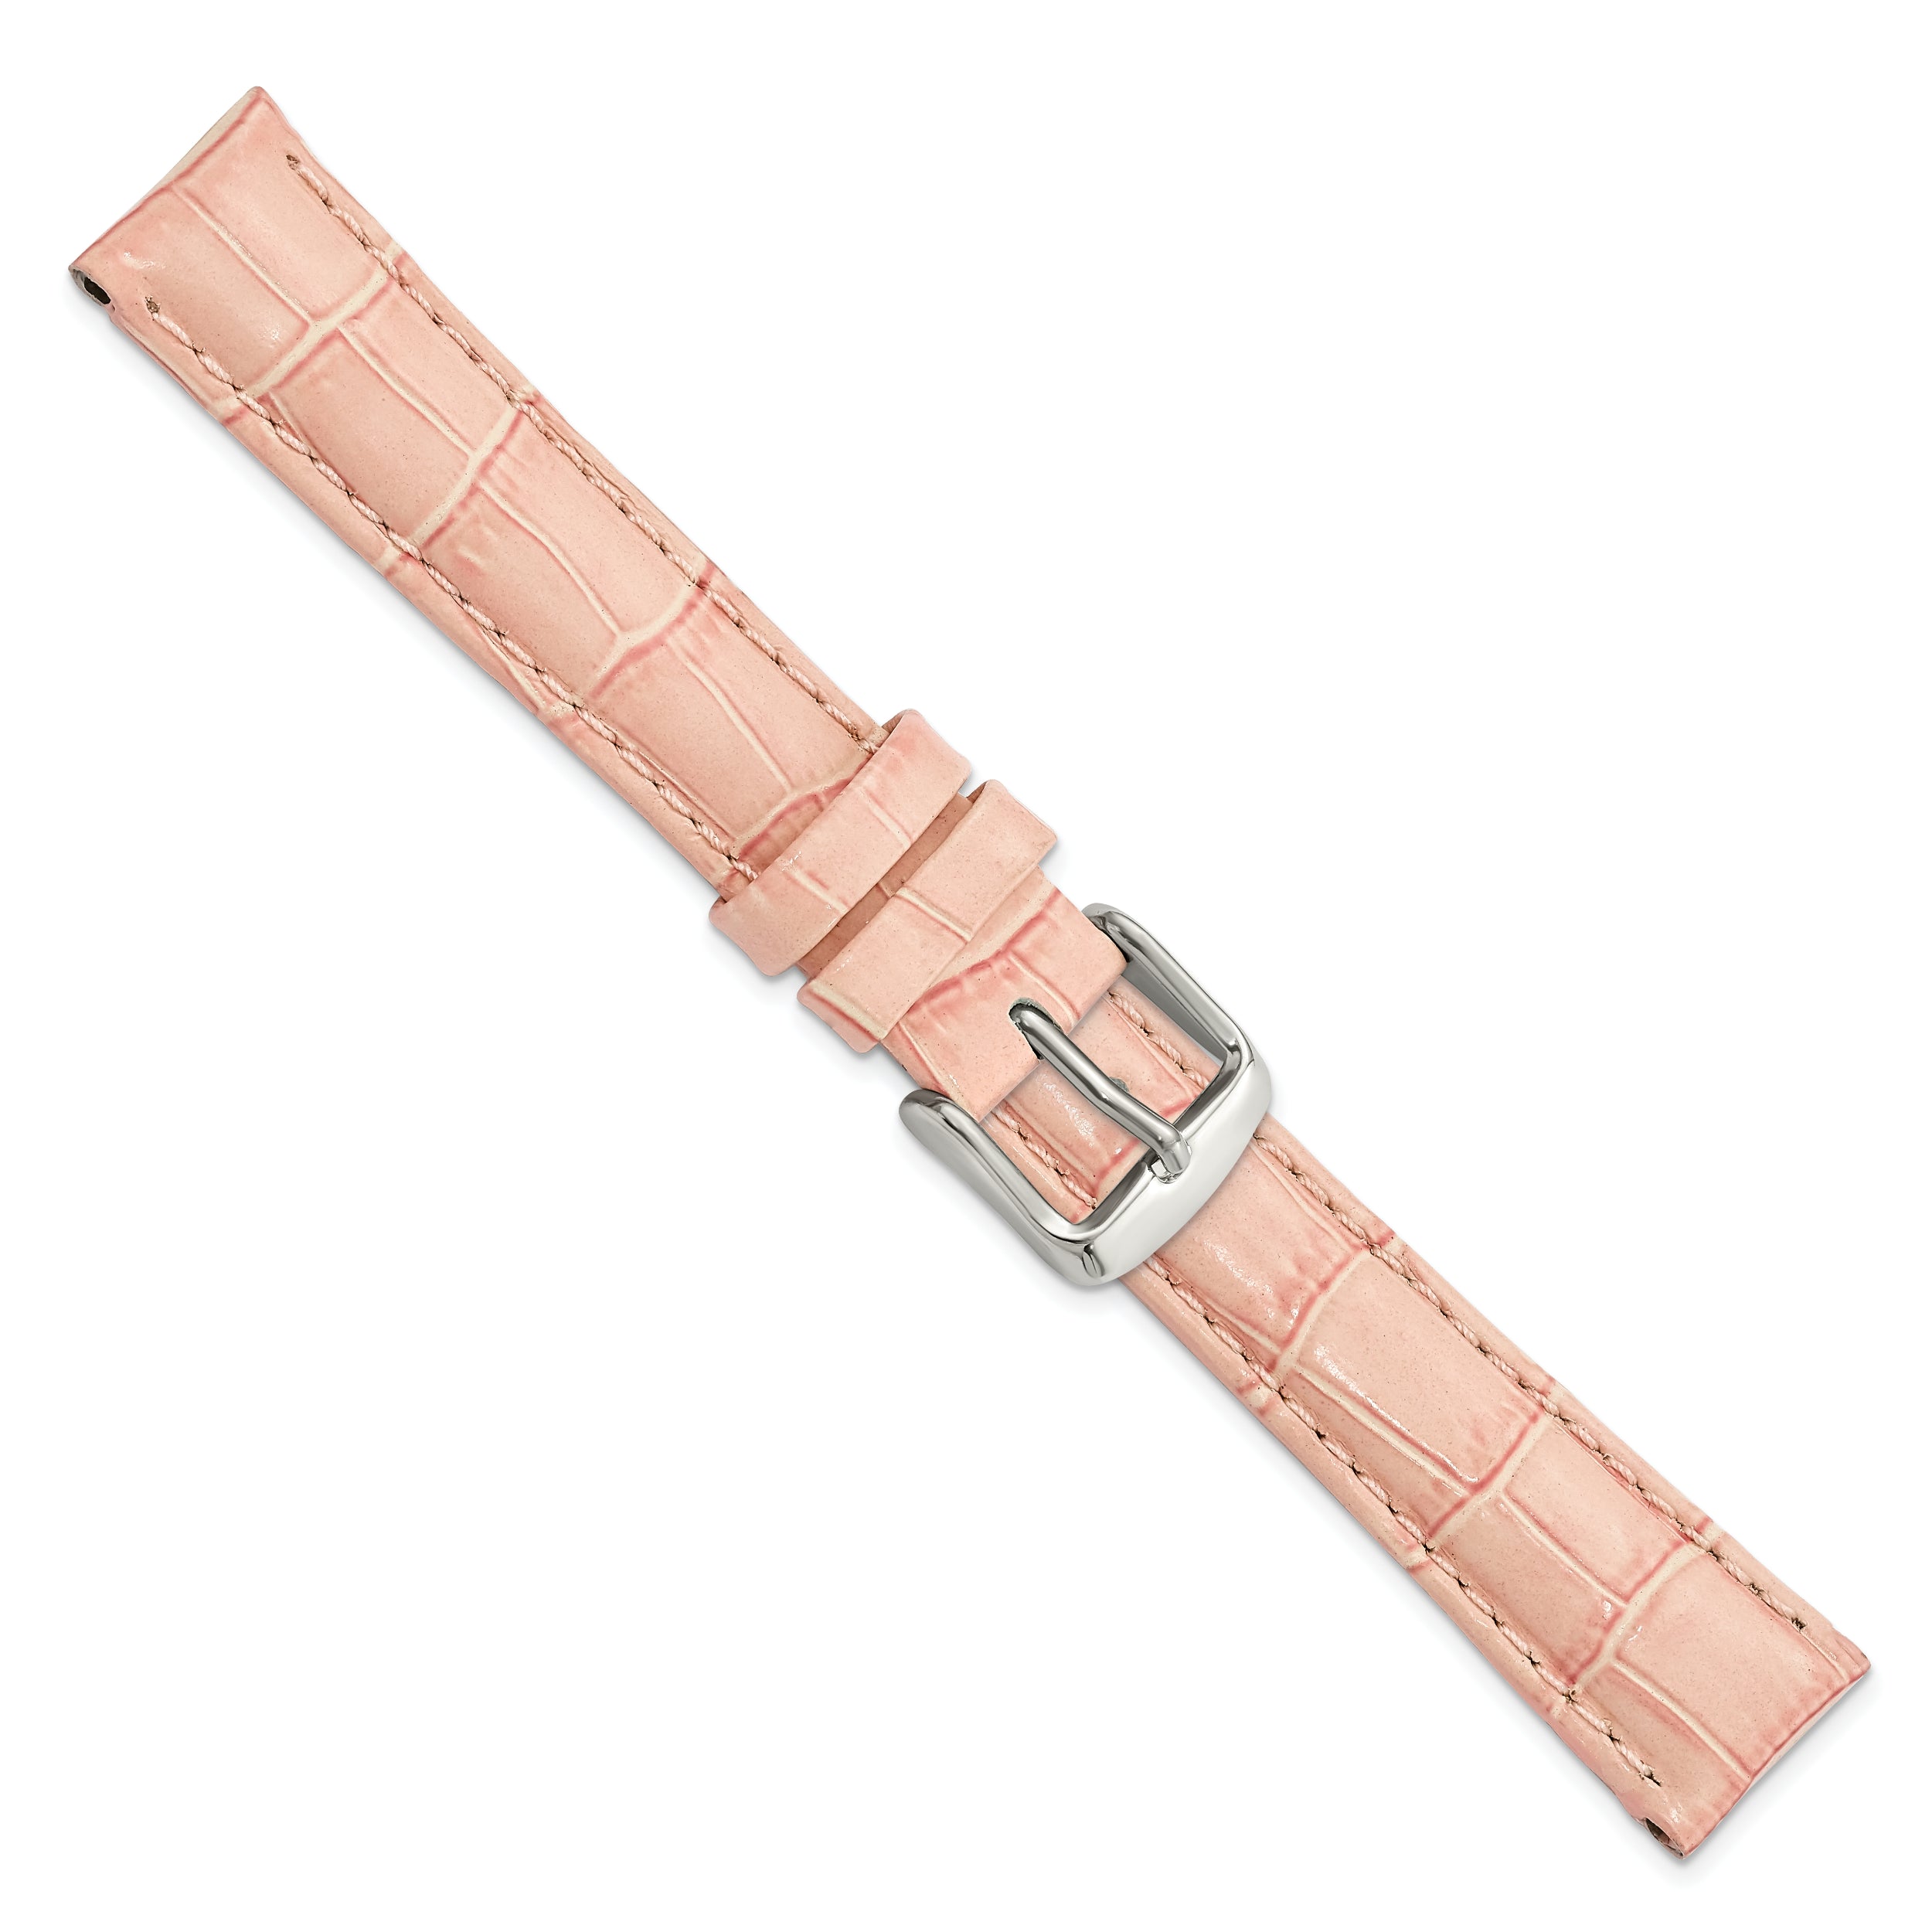 12mm Pink Crocodile Grain Chronograph Leather with Silver-tone Buckle 6.75 inch Watch Band